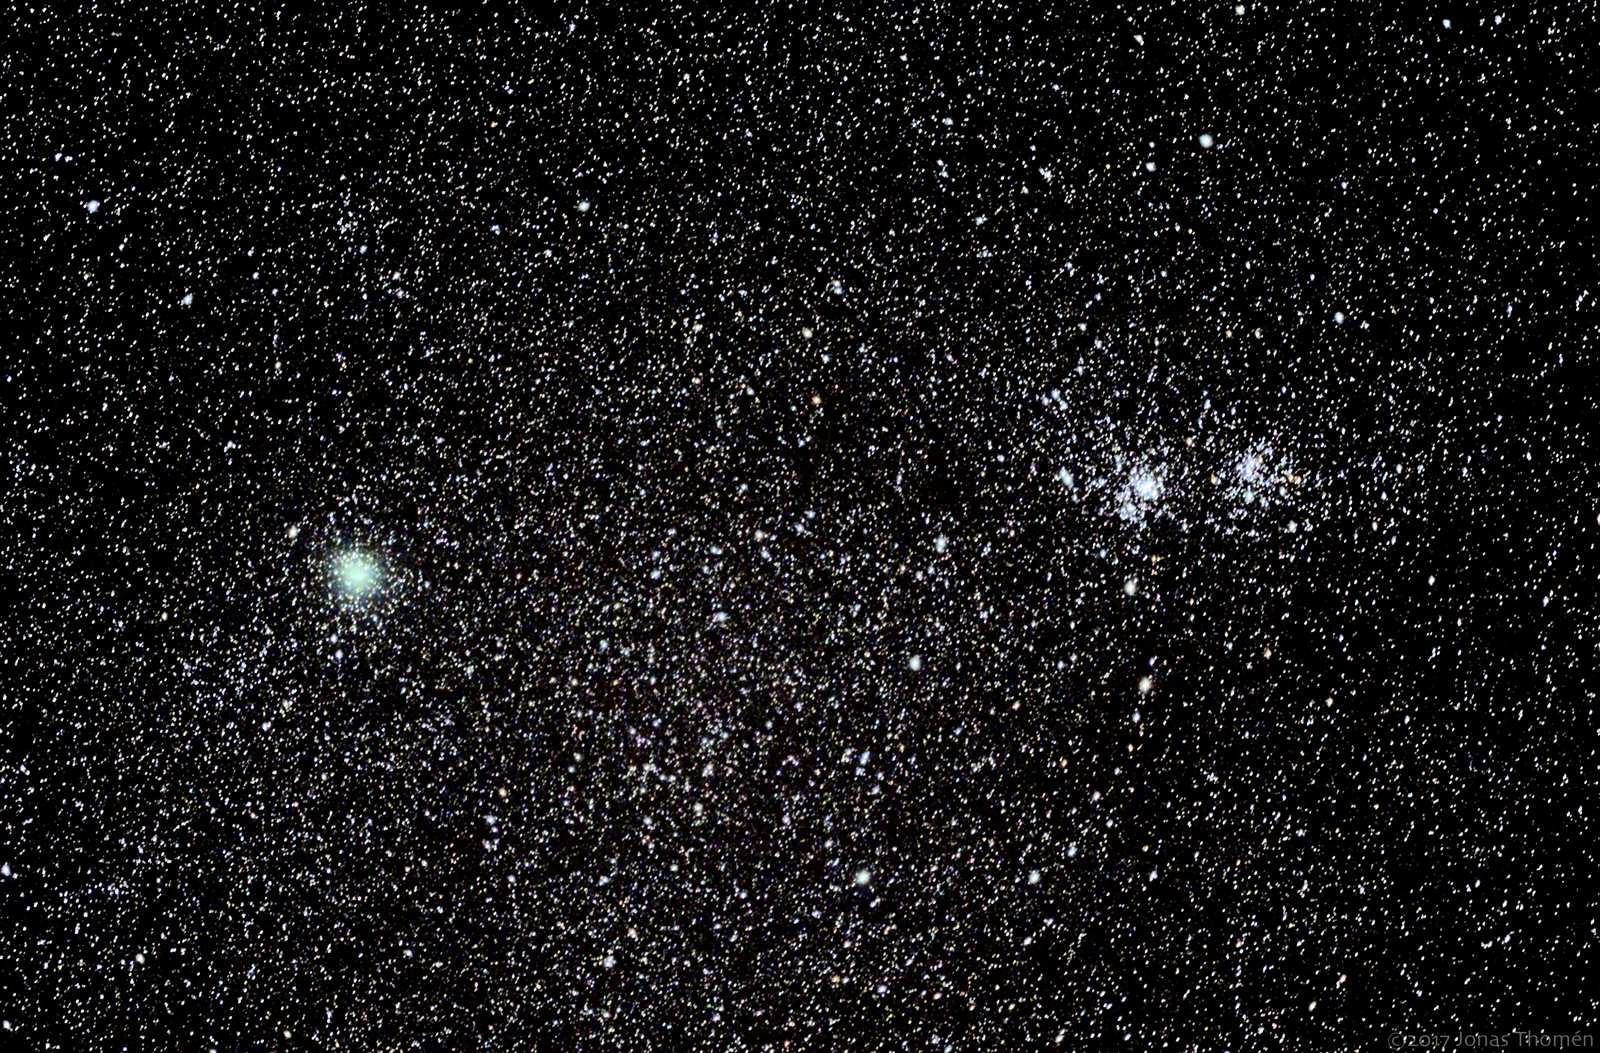 Comet 103p Hartley 2 and Double Cluster